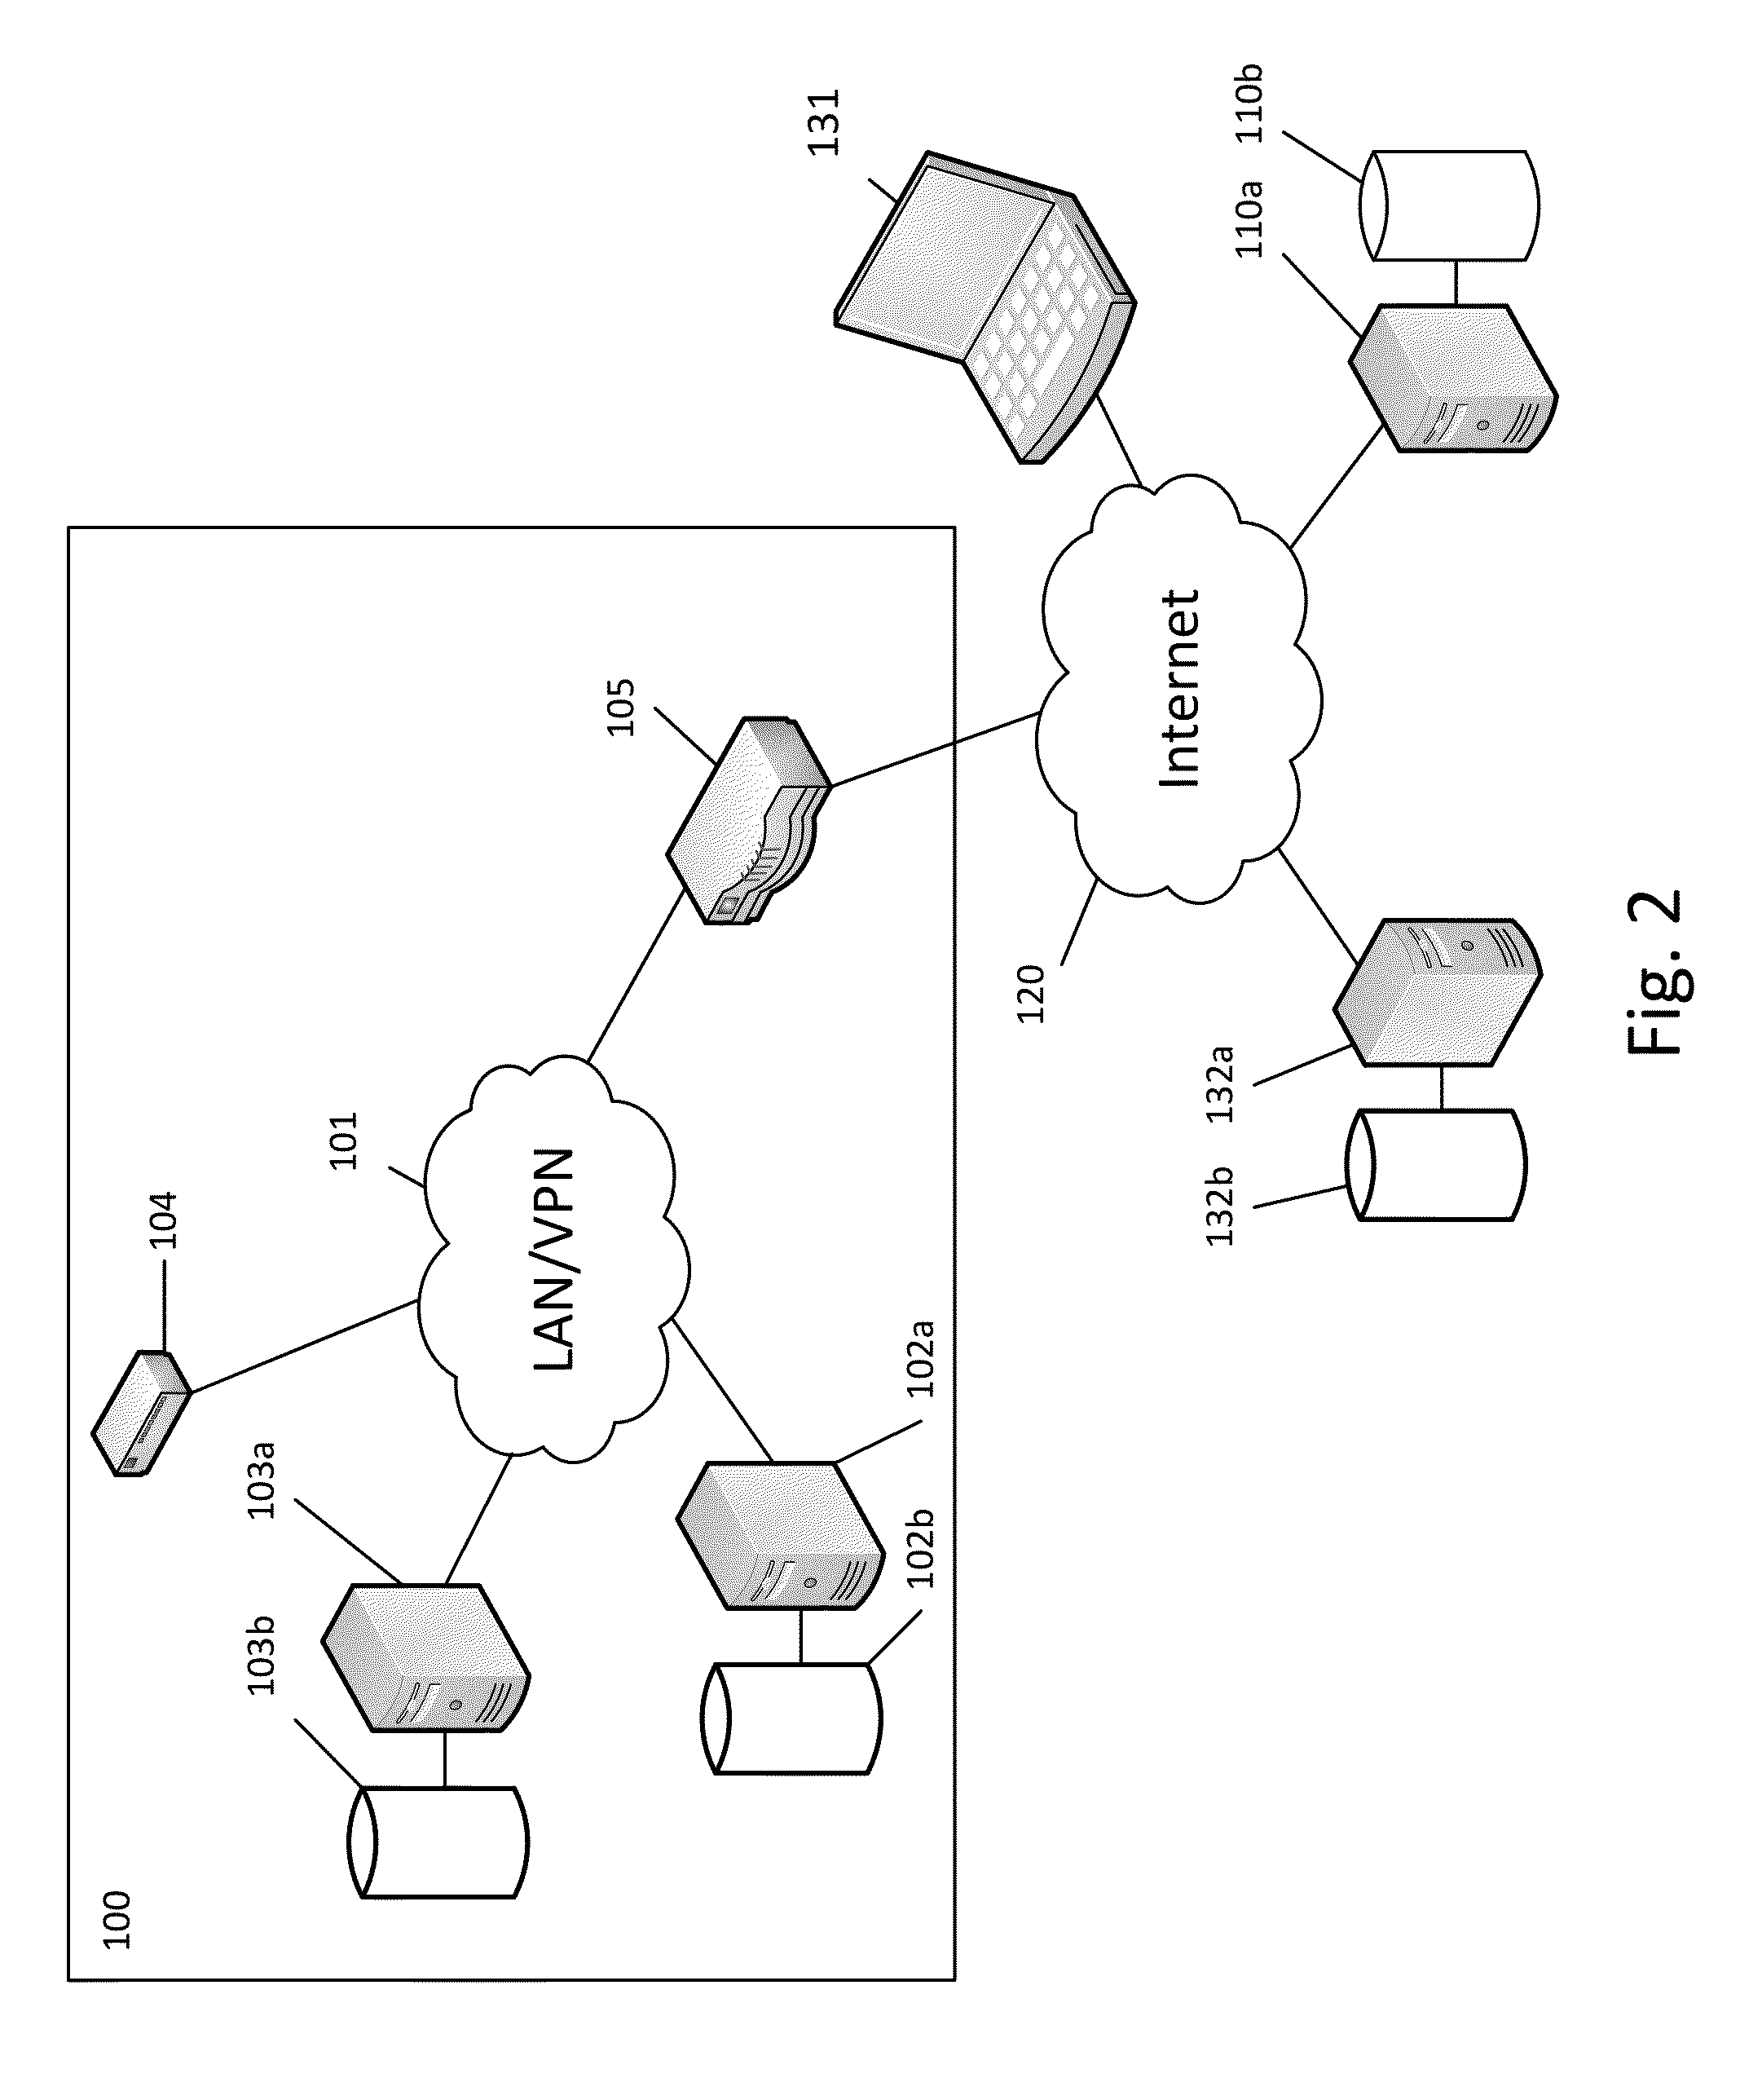 System and Method for Assessing Risk and Marketing Potential Using Industry-Specific Operations Management Transaction Data